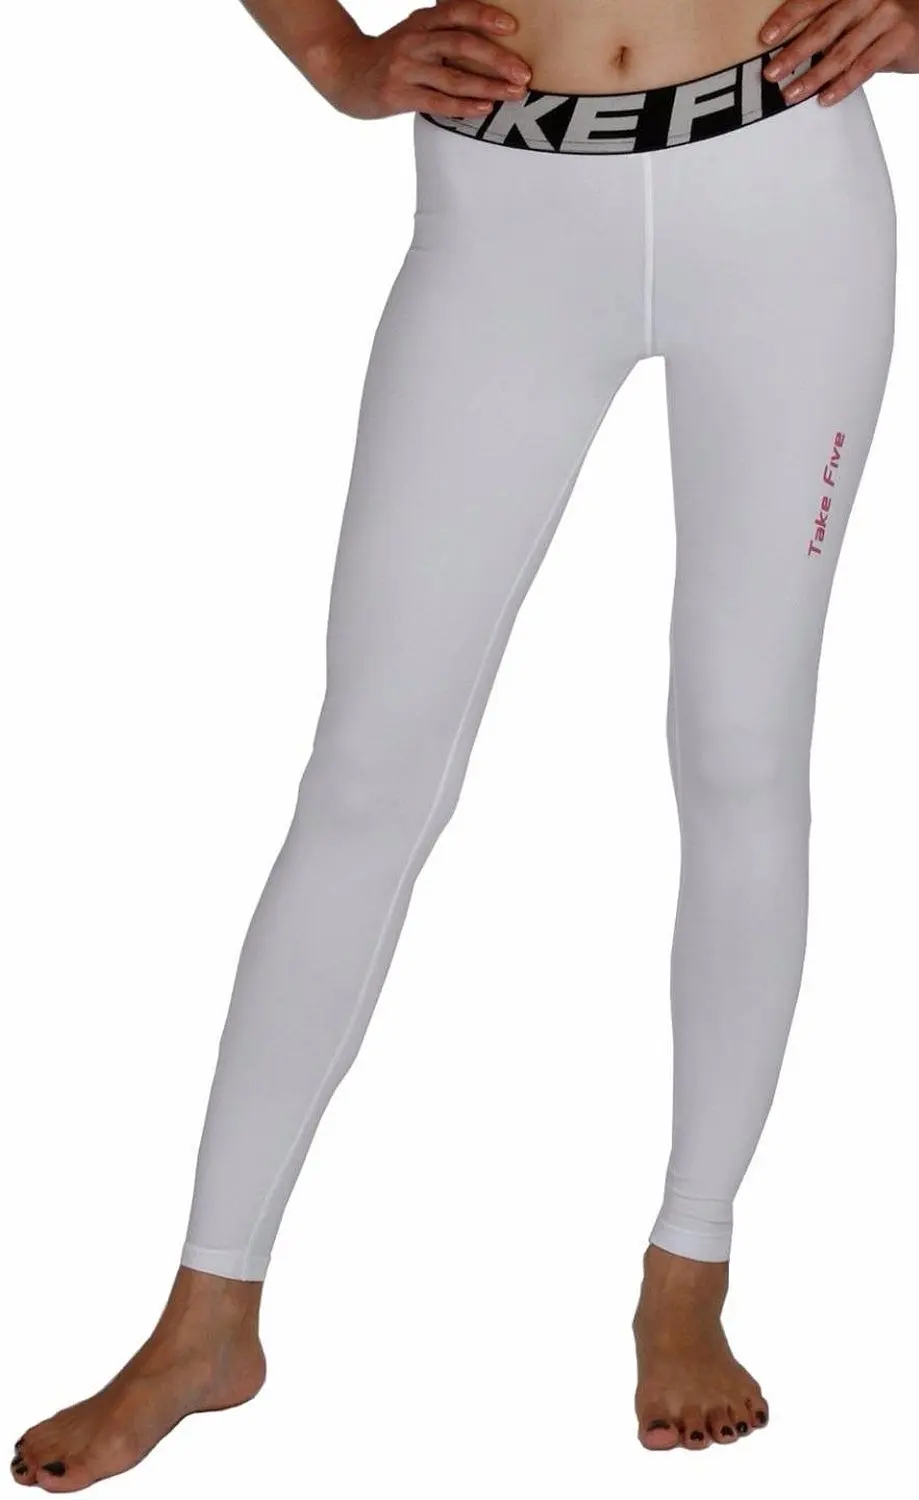 Buy New 139 Skin Tights Compression Leggings Base Layer